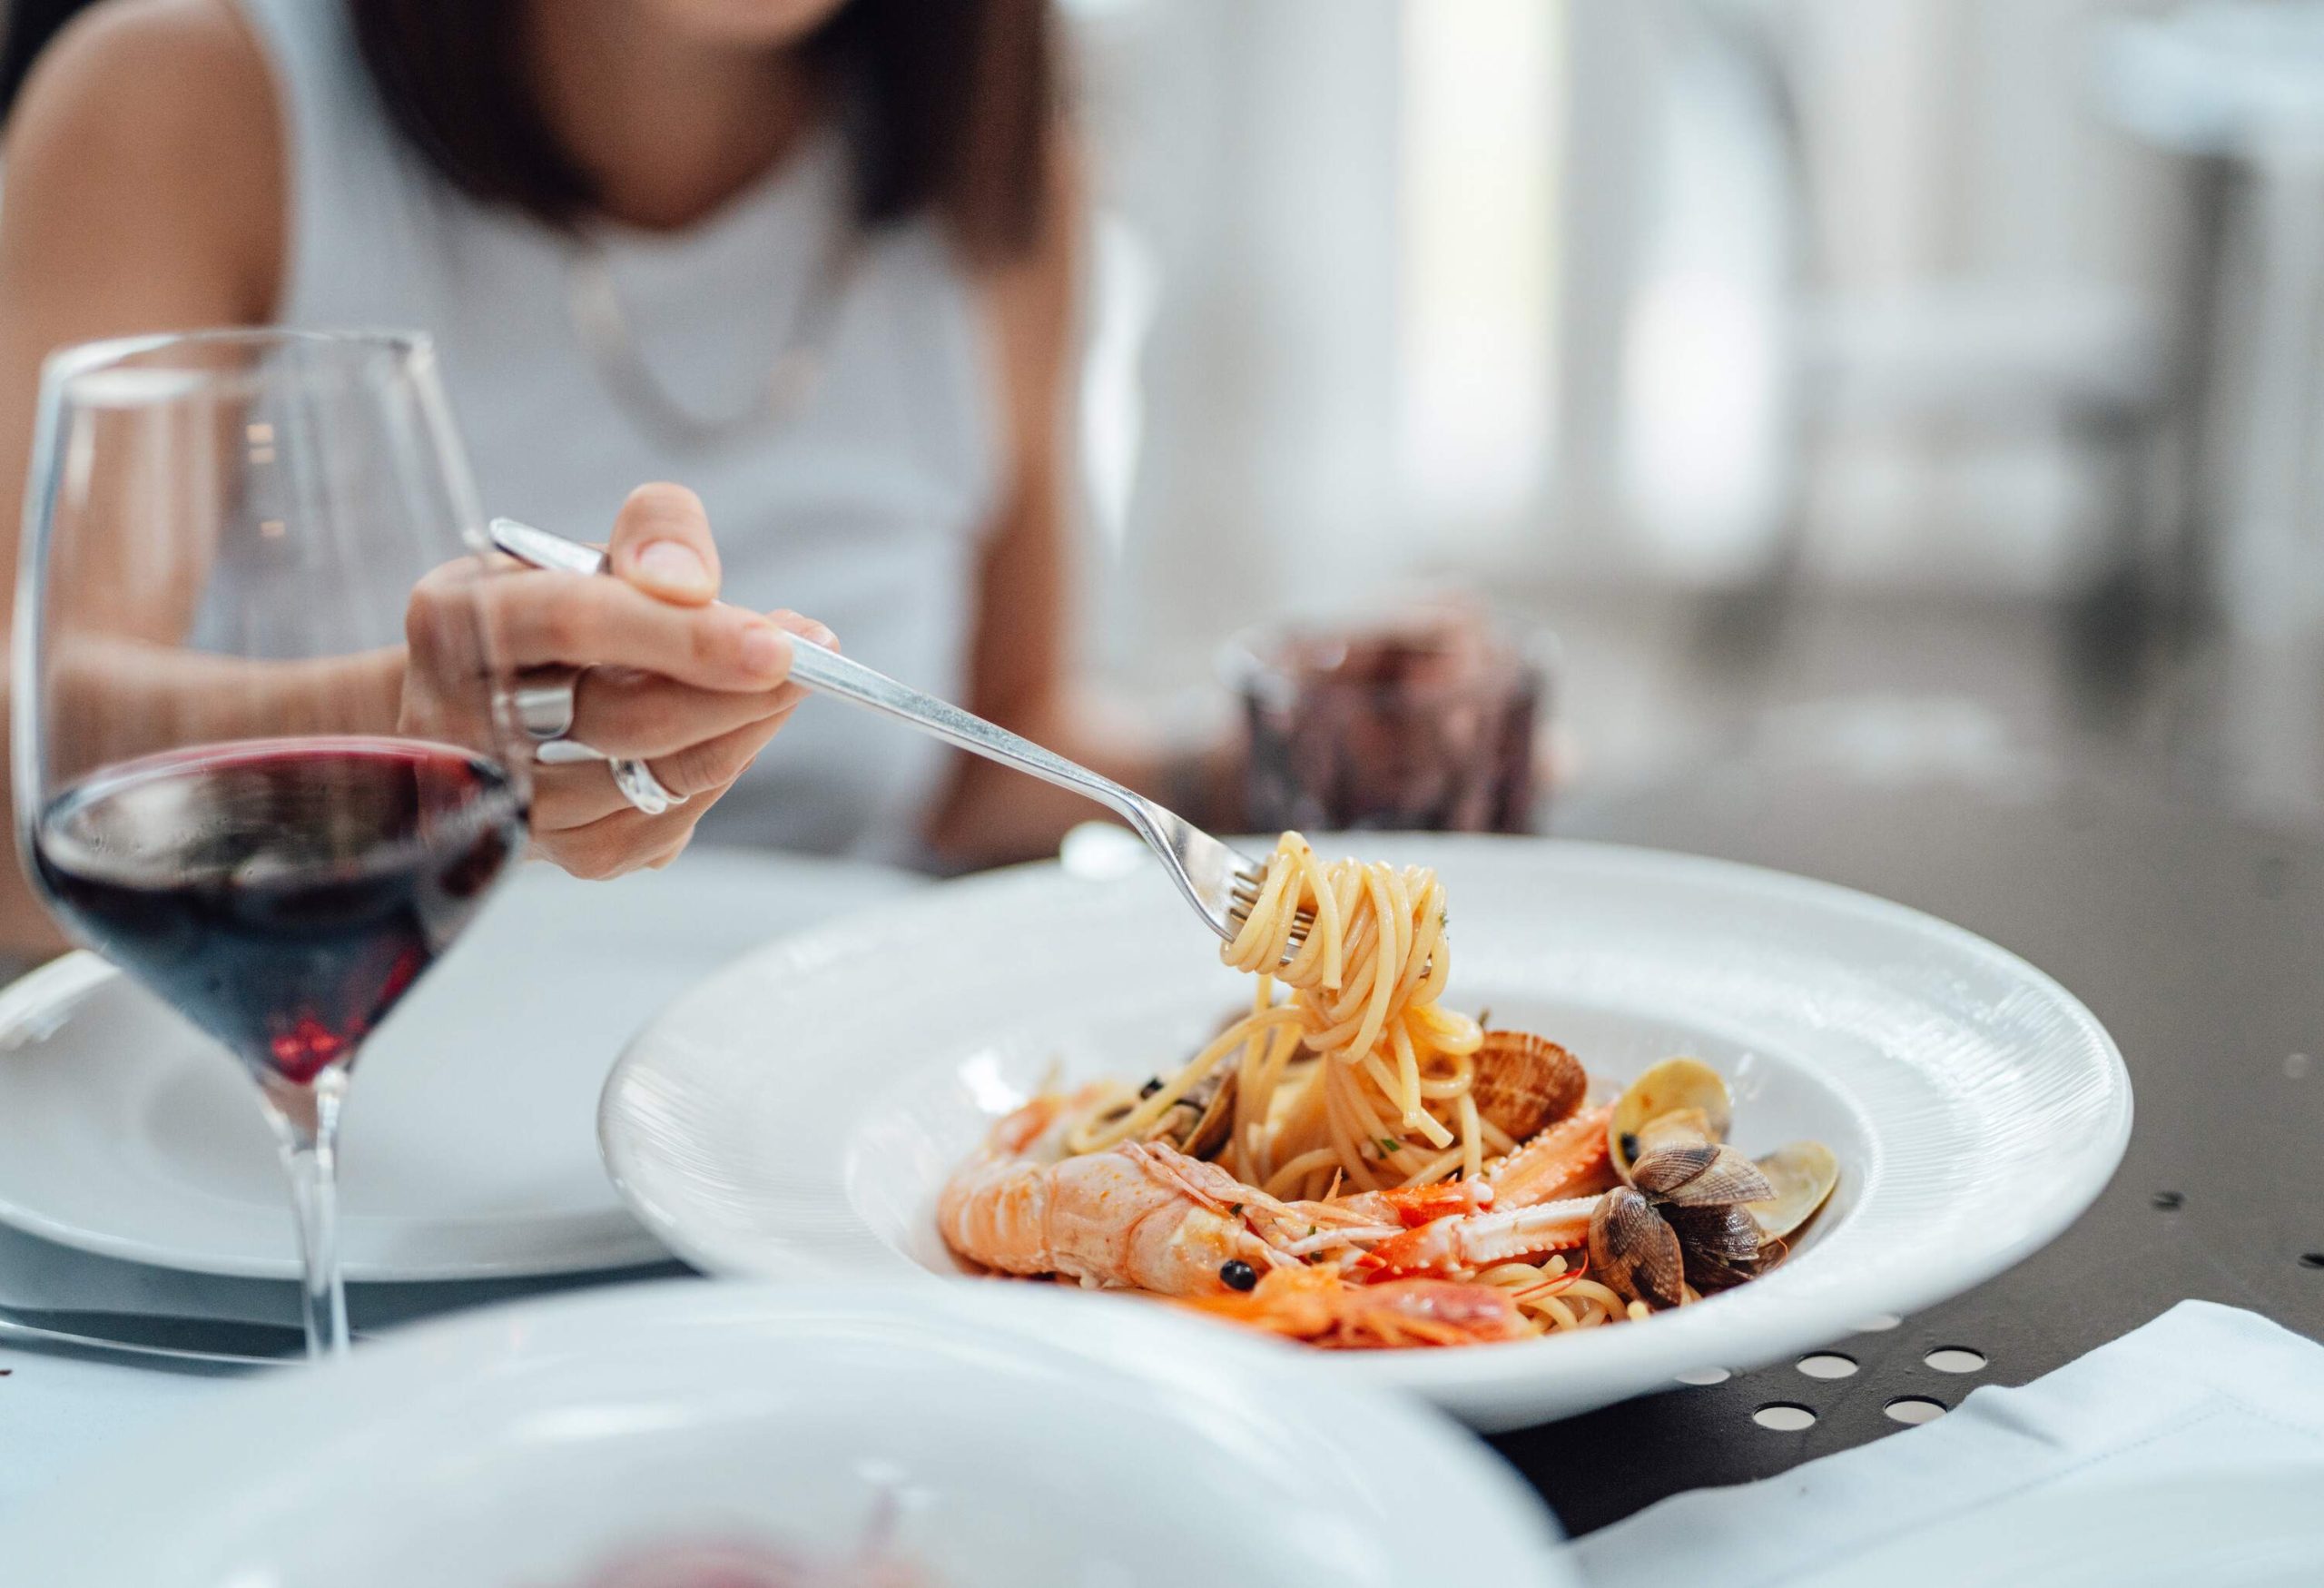 A woman is picking from a plate of seafood pasta next to a glass of red wine.